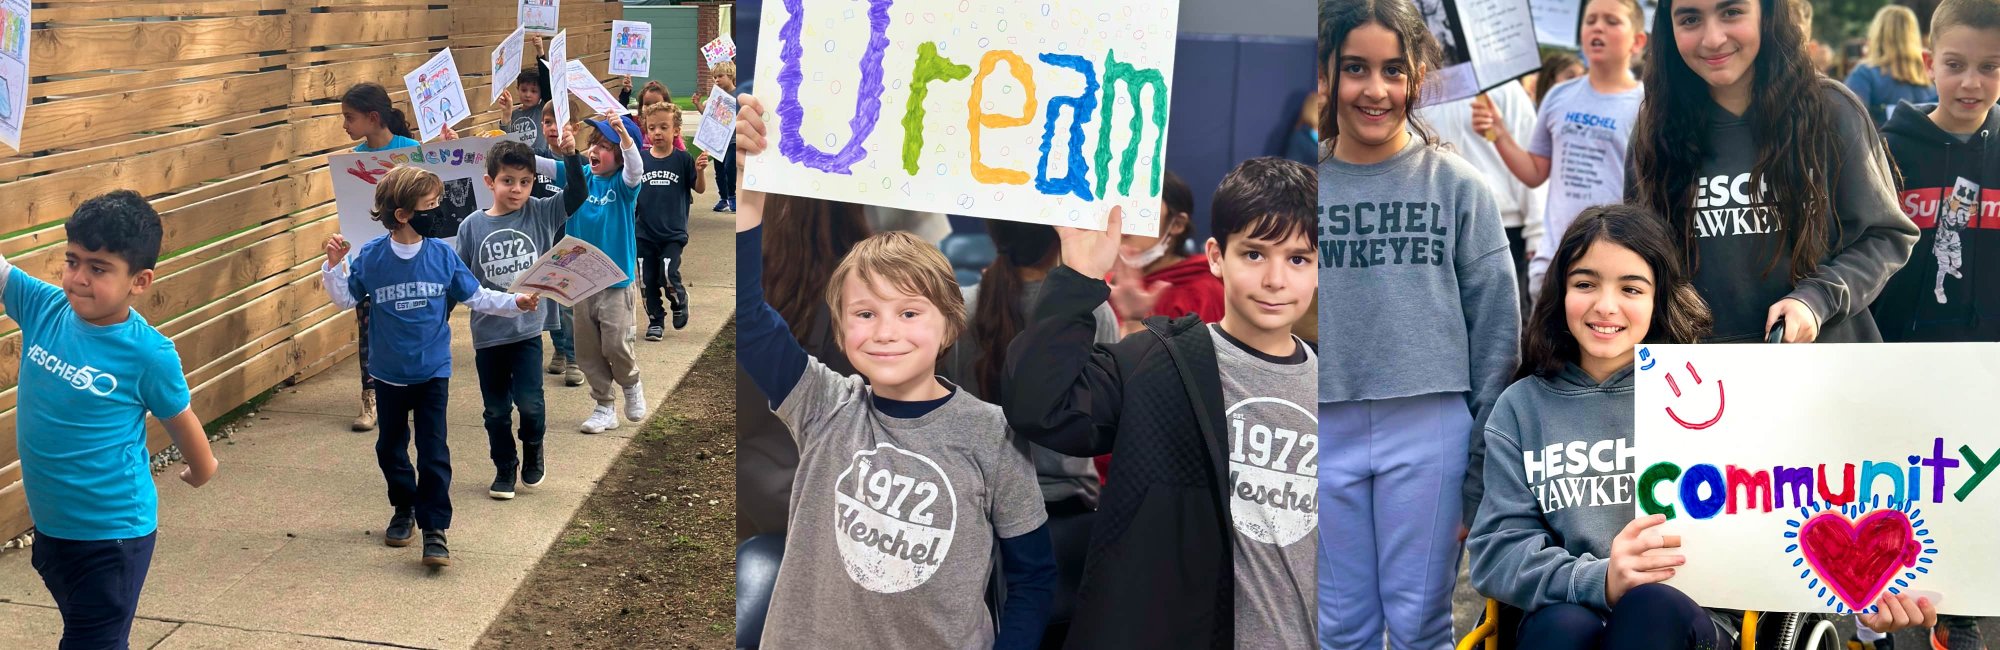 Collage of images of kids marching and holding signs